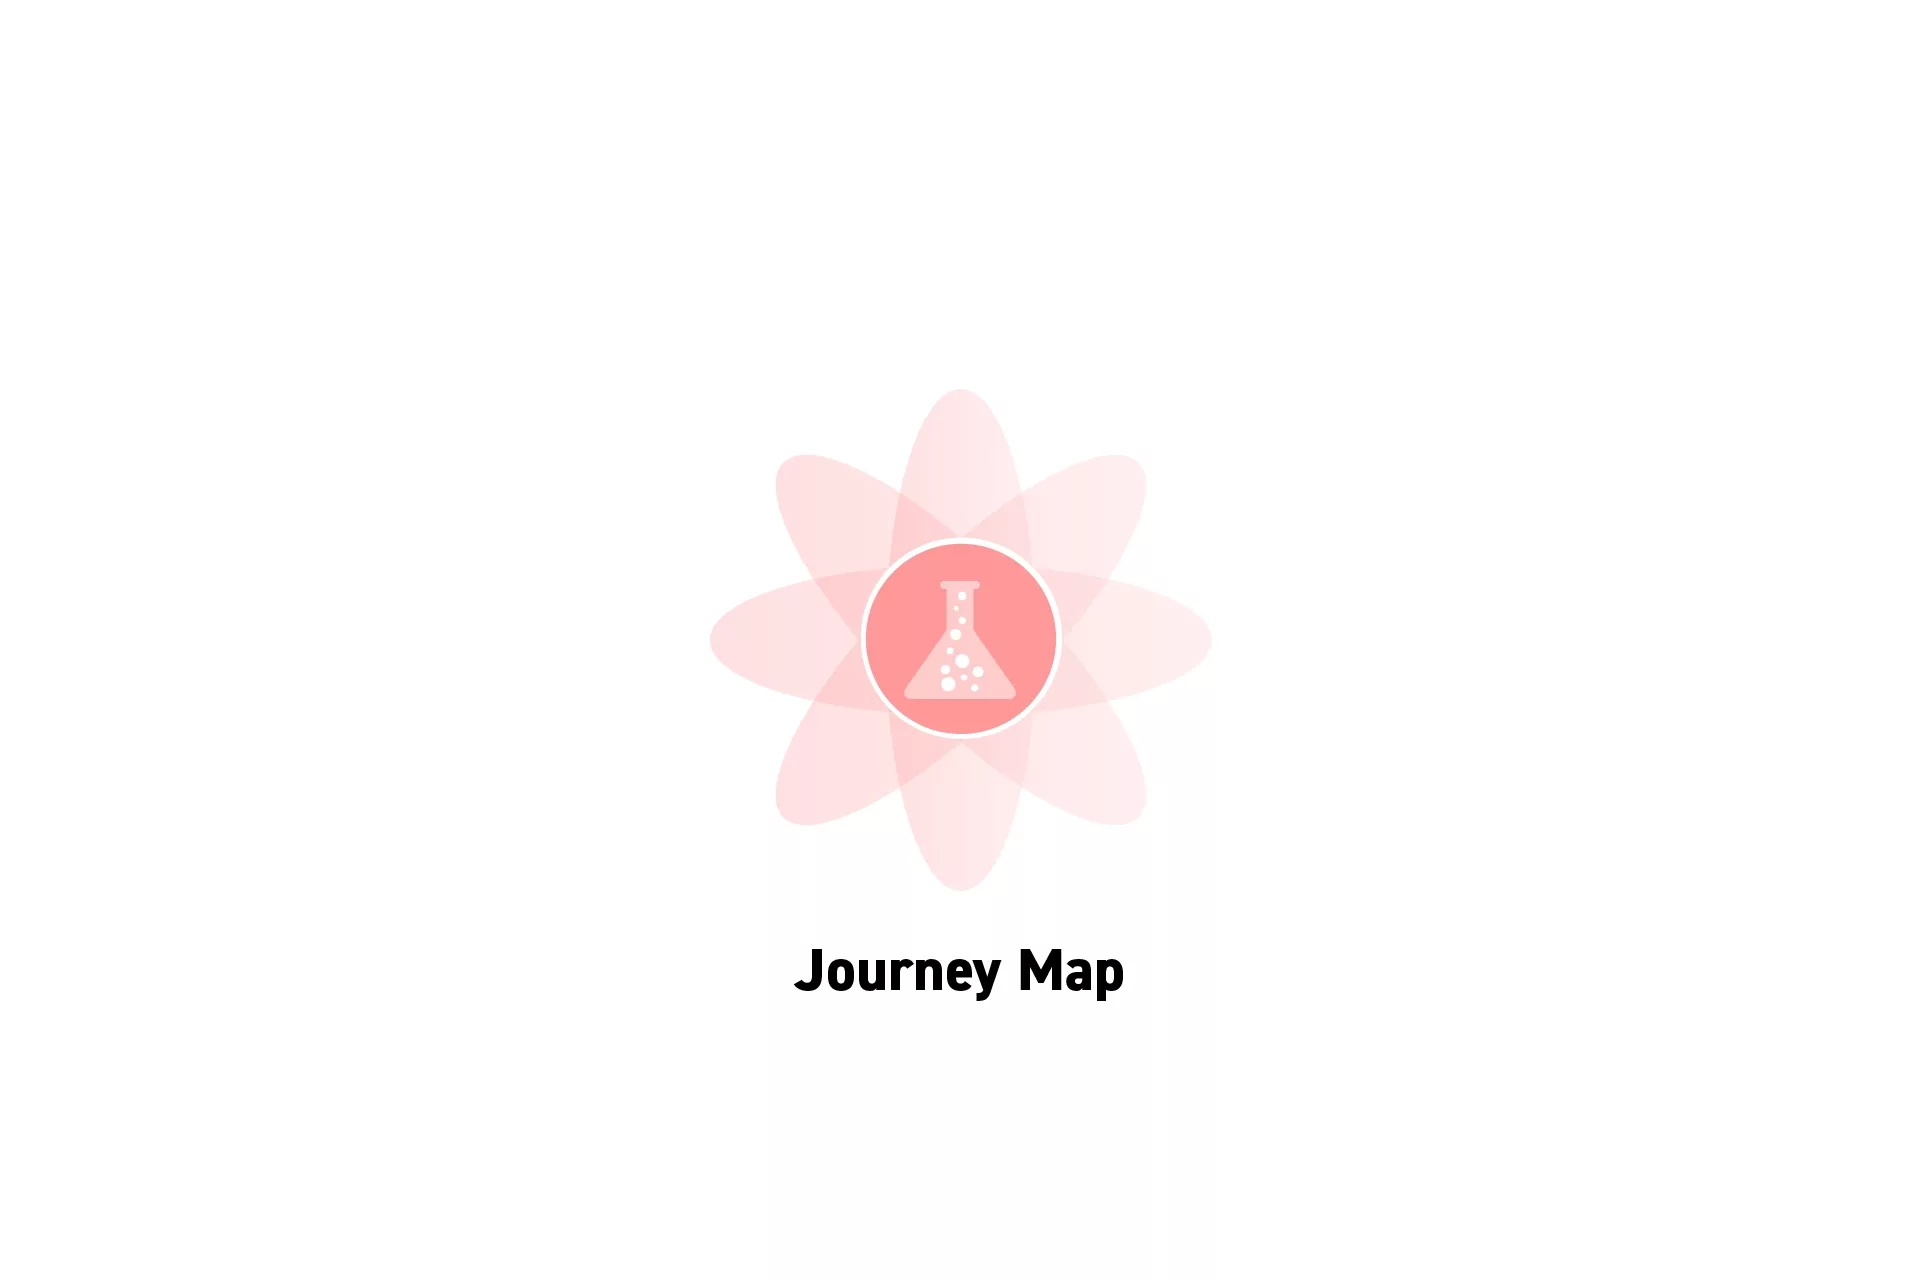 A flower that represents Strategy with the text “Journey Map” beneath it.